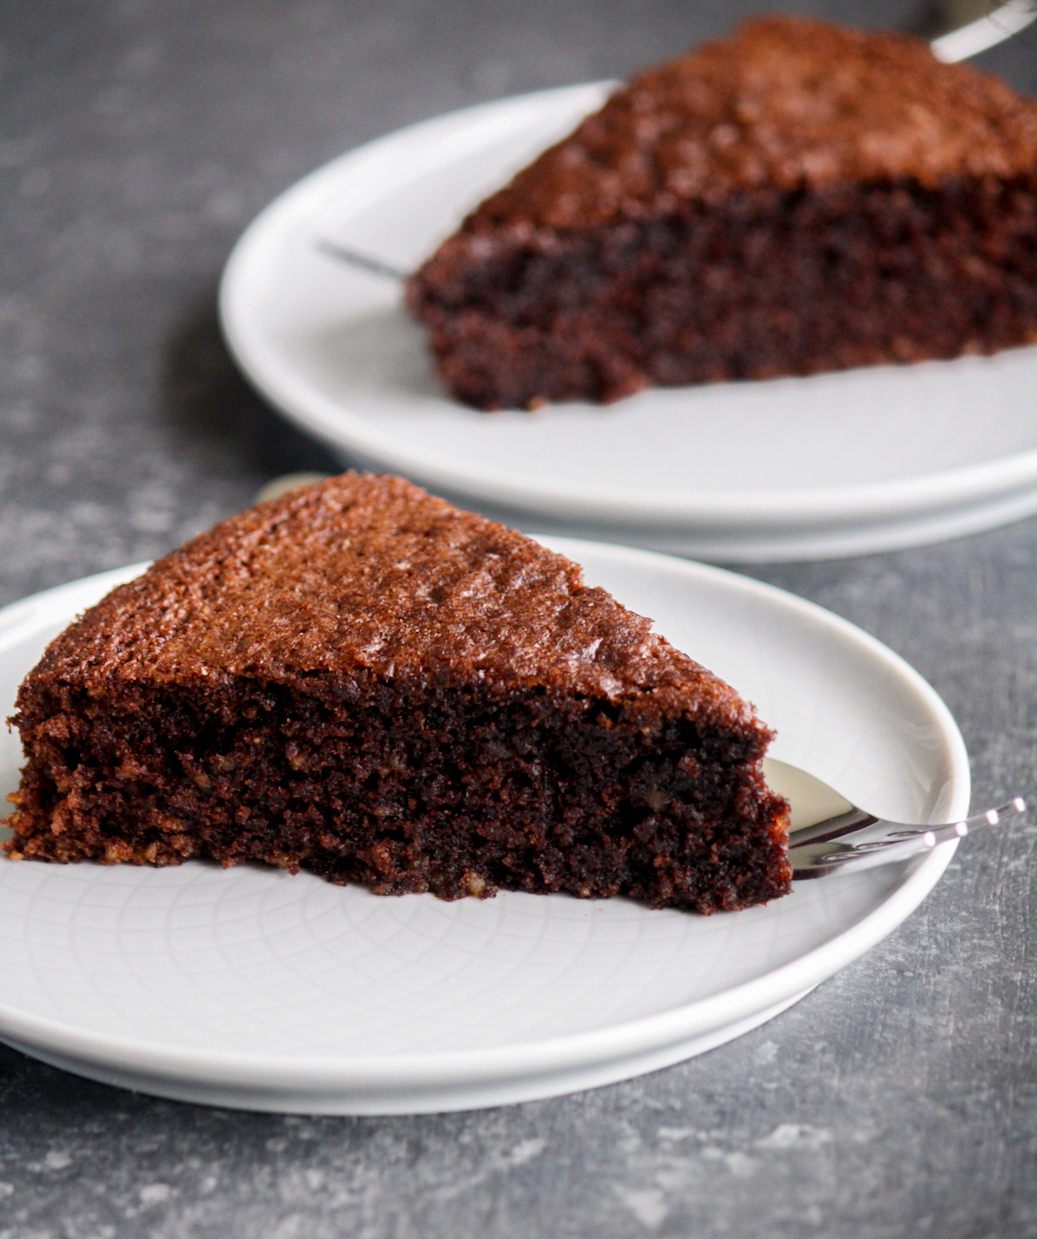 Super moist and soft chocolate cake made with ground almonds and olive oil